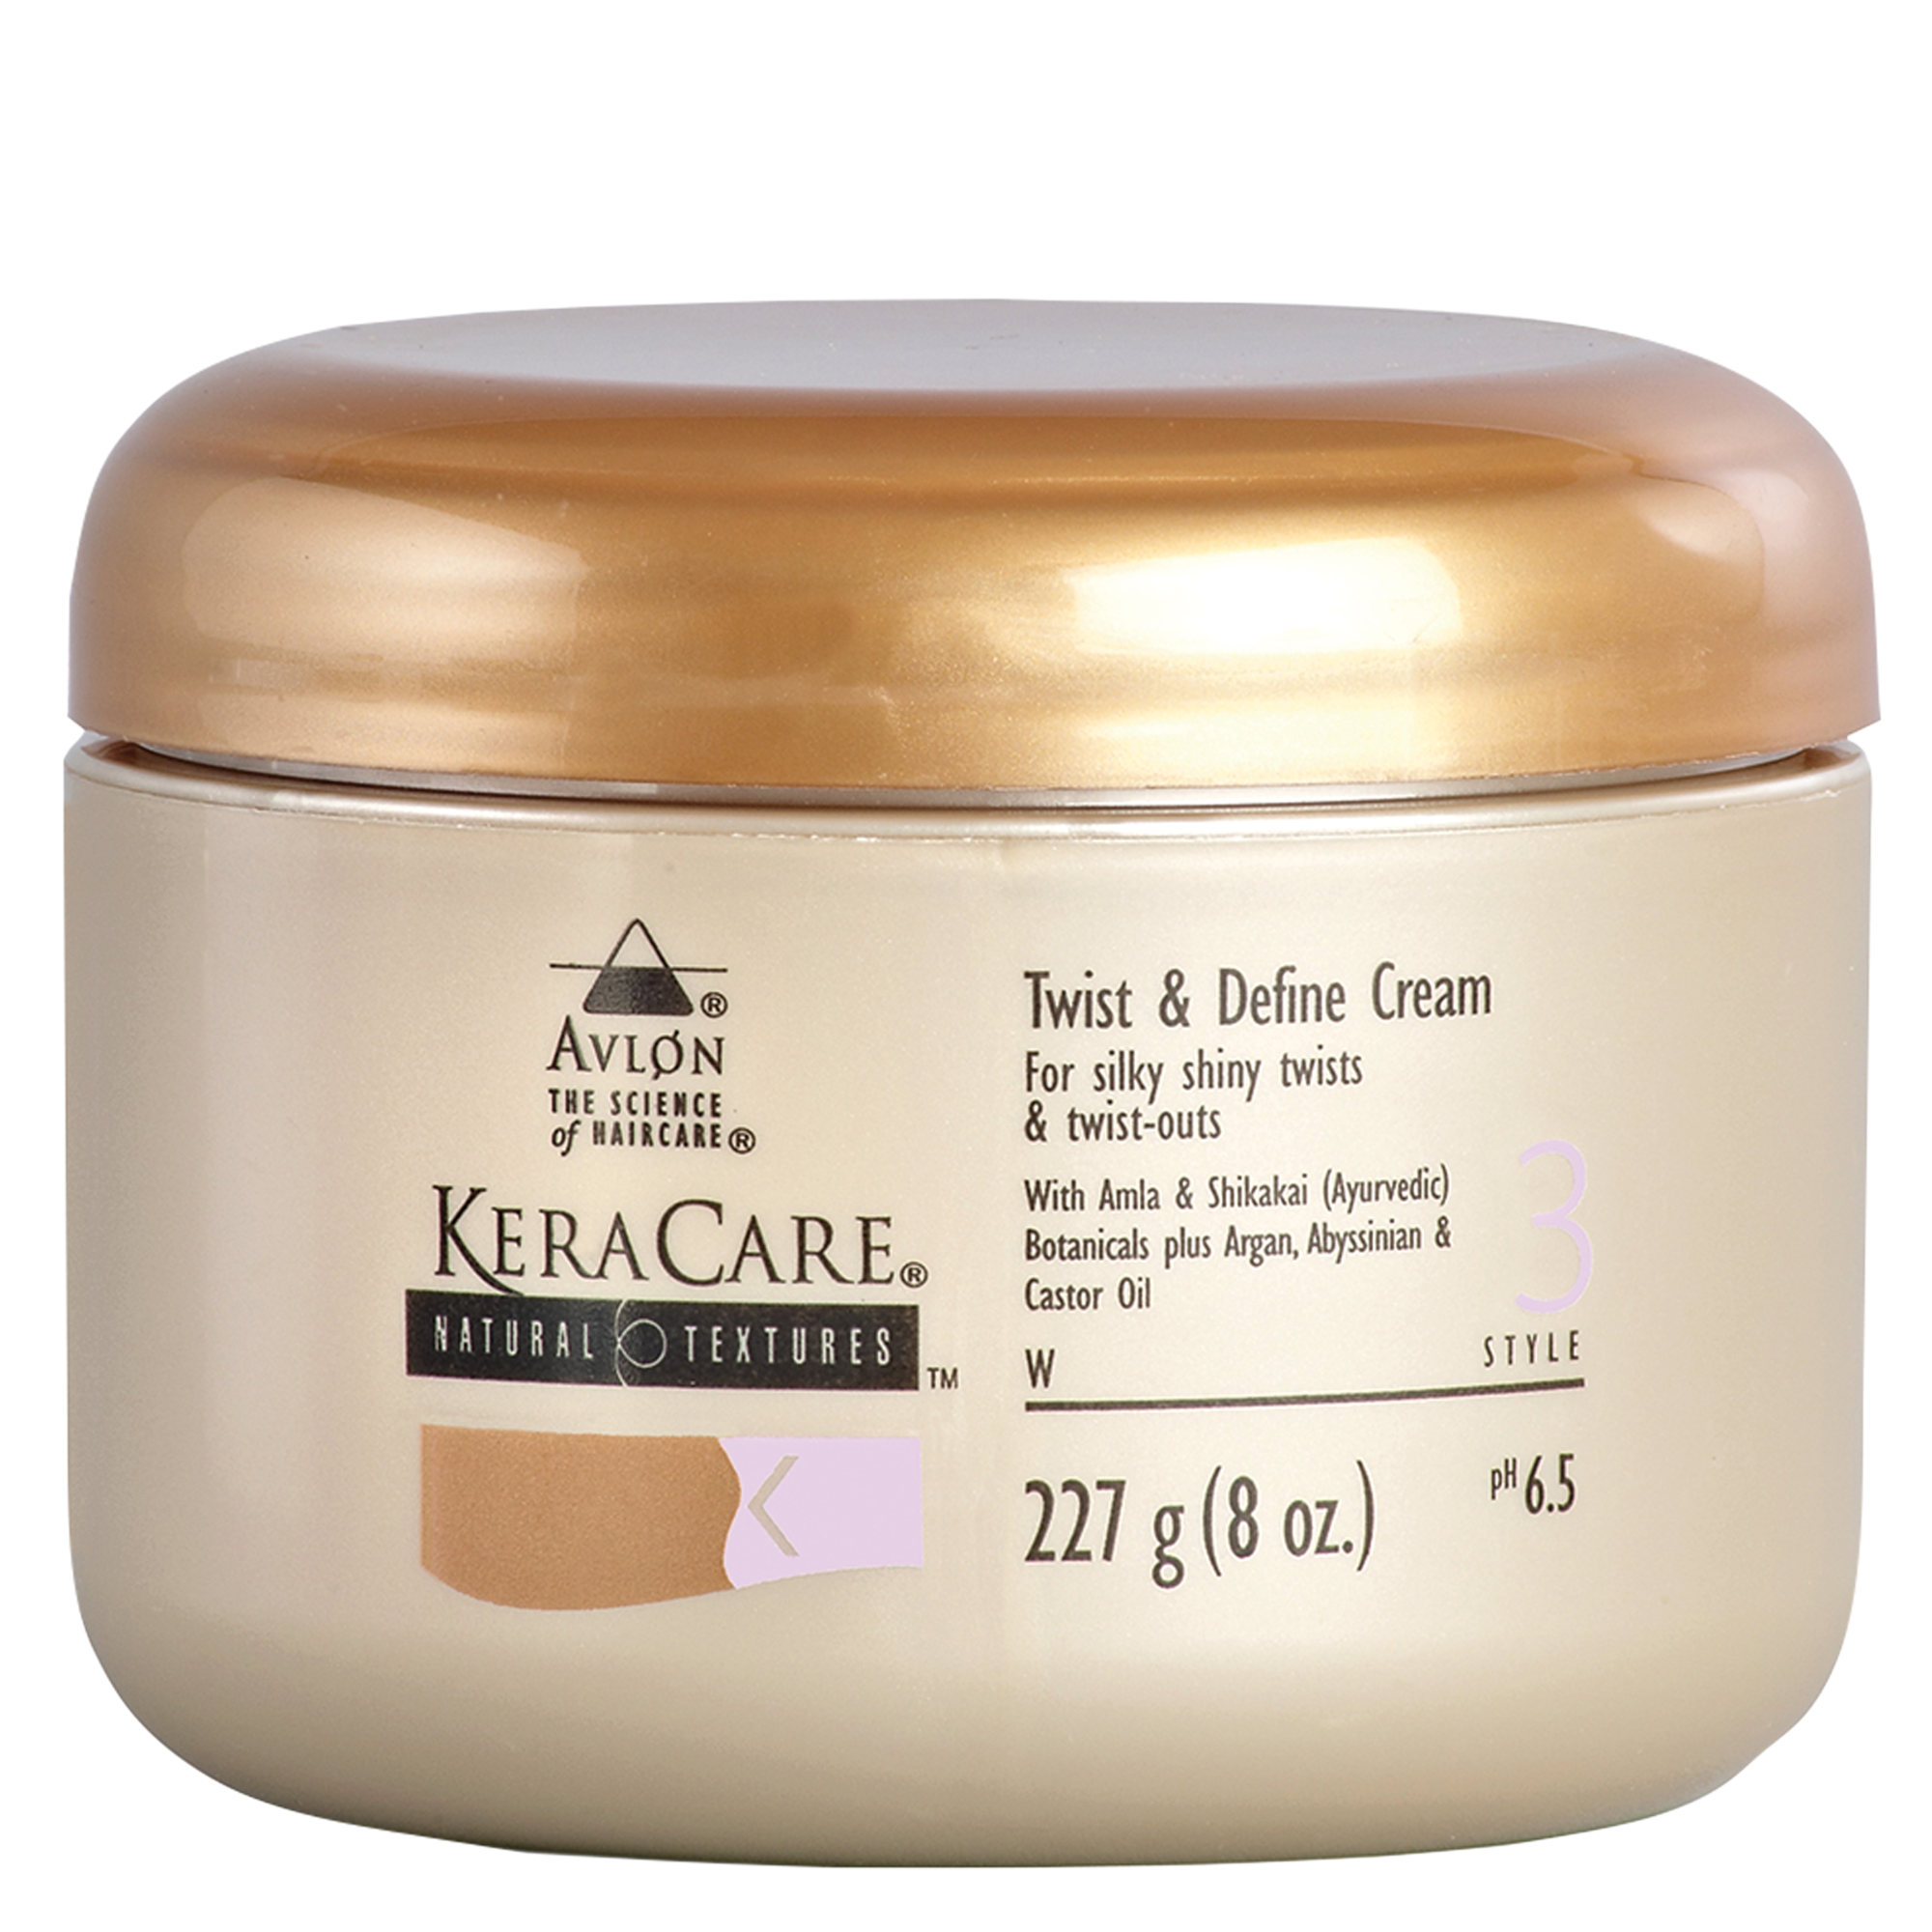 KeraCare Natural Textures Twist and Define Cream